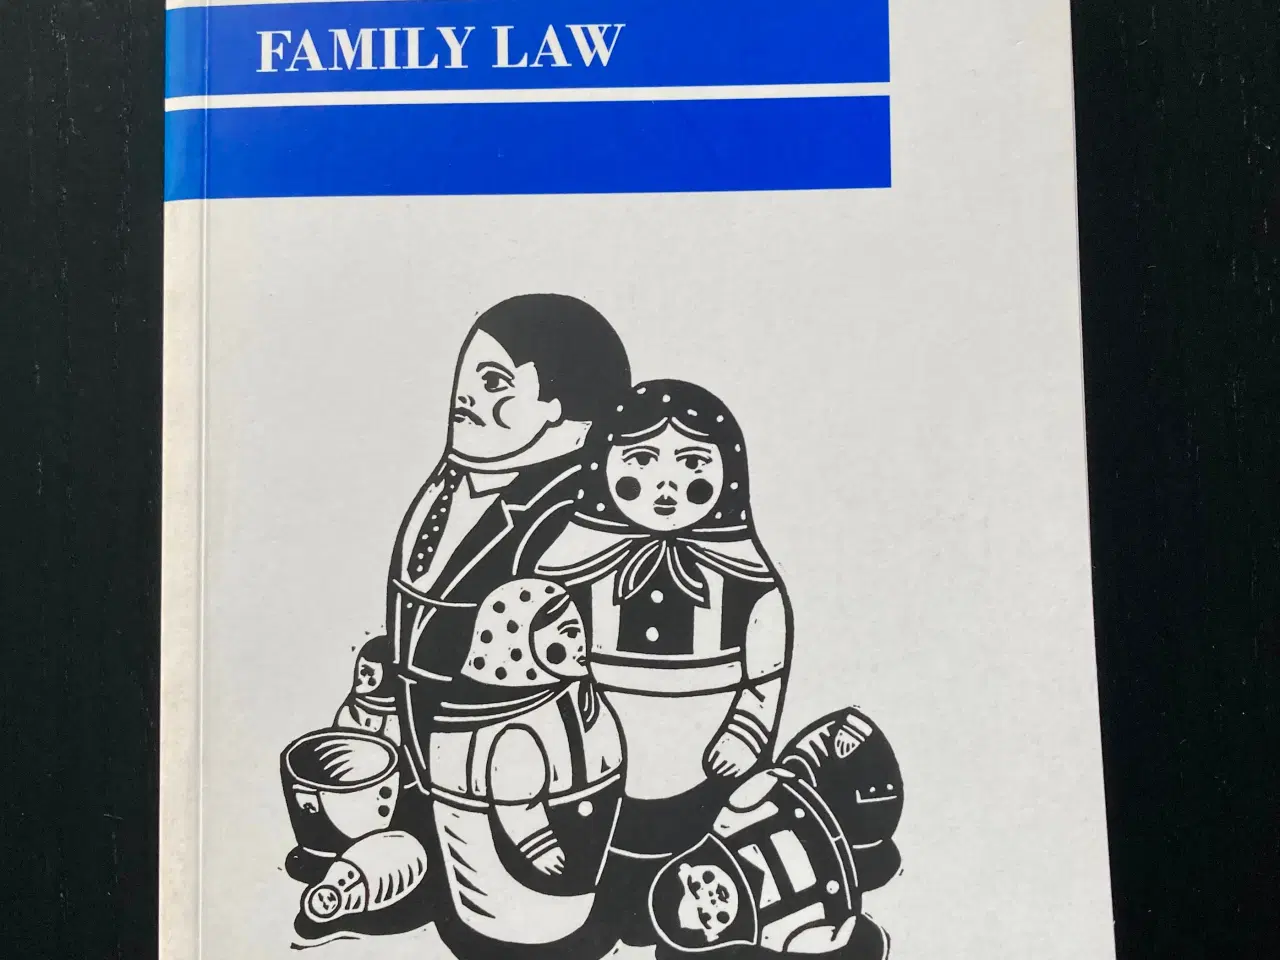 Billede 1 - Kate Standley: Family Law, 2004